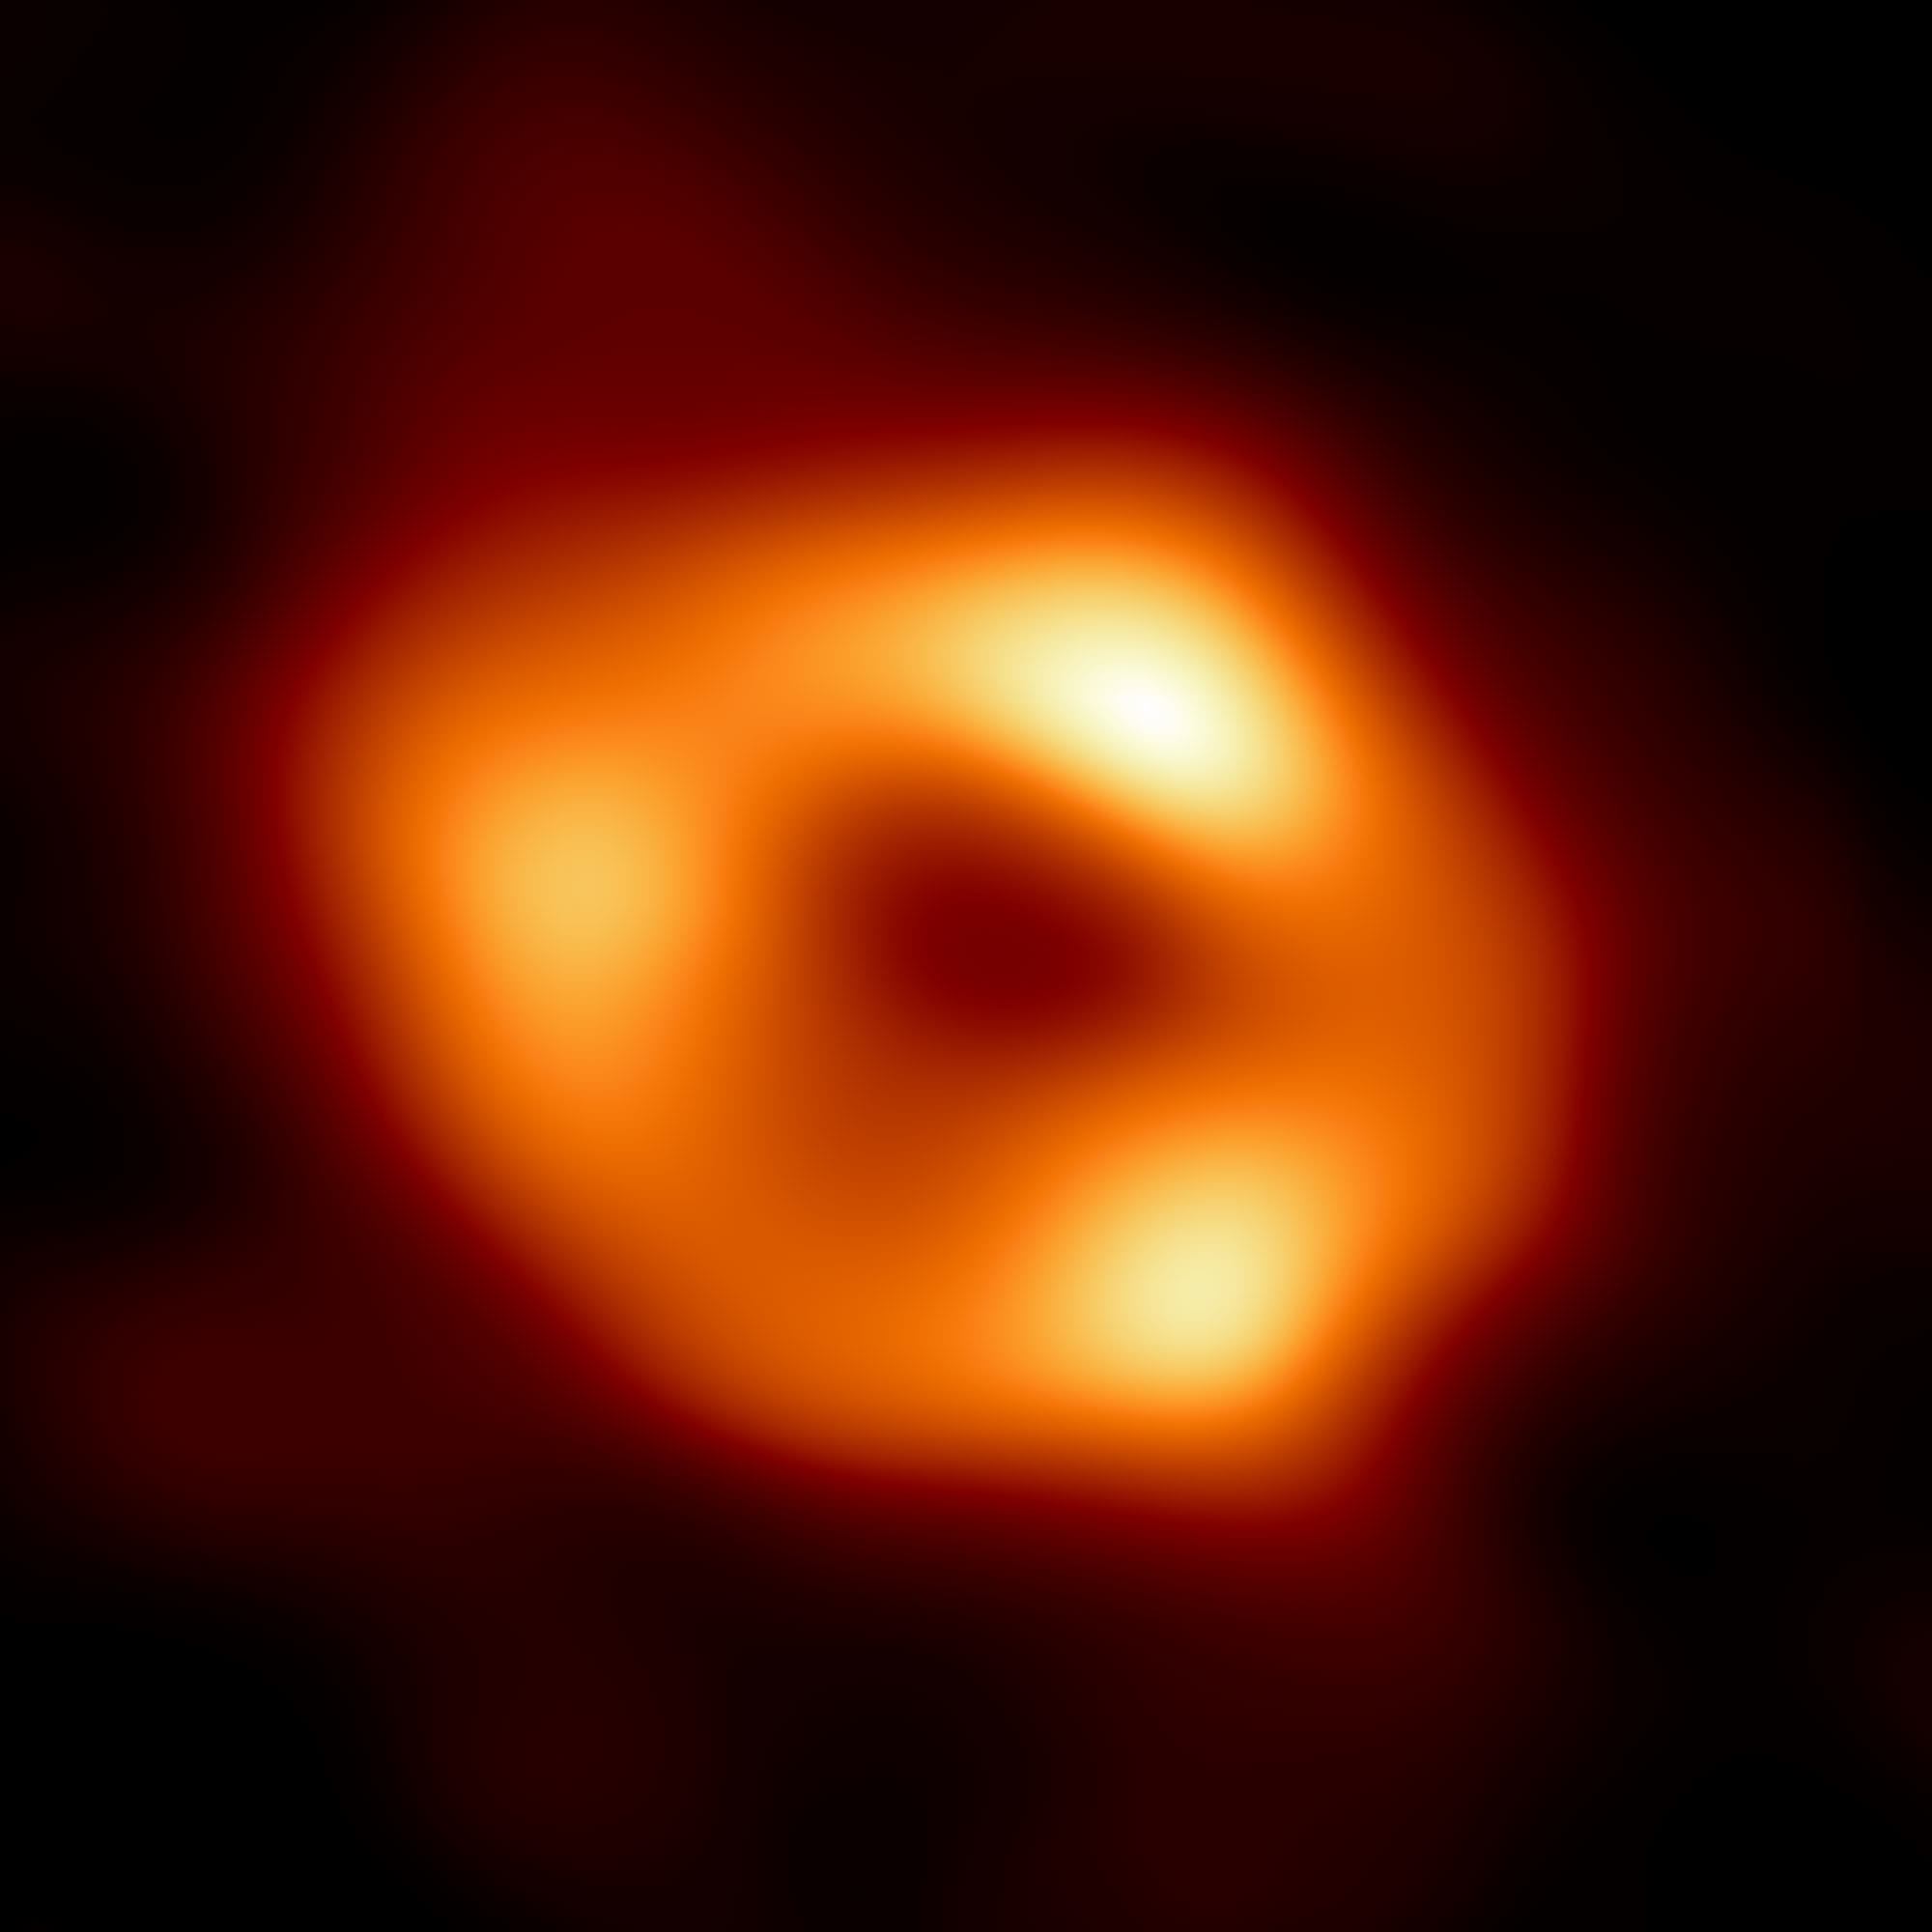 Astronomers share first image of the black hole at the center of the Milky Way